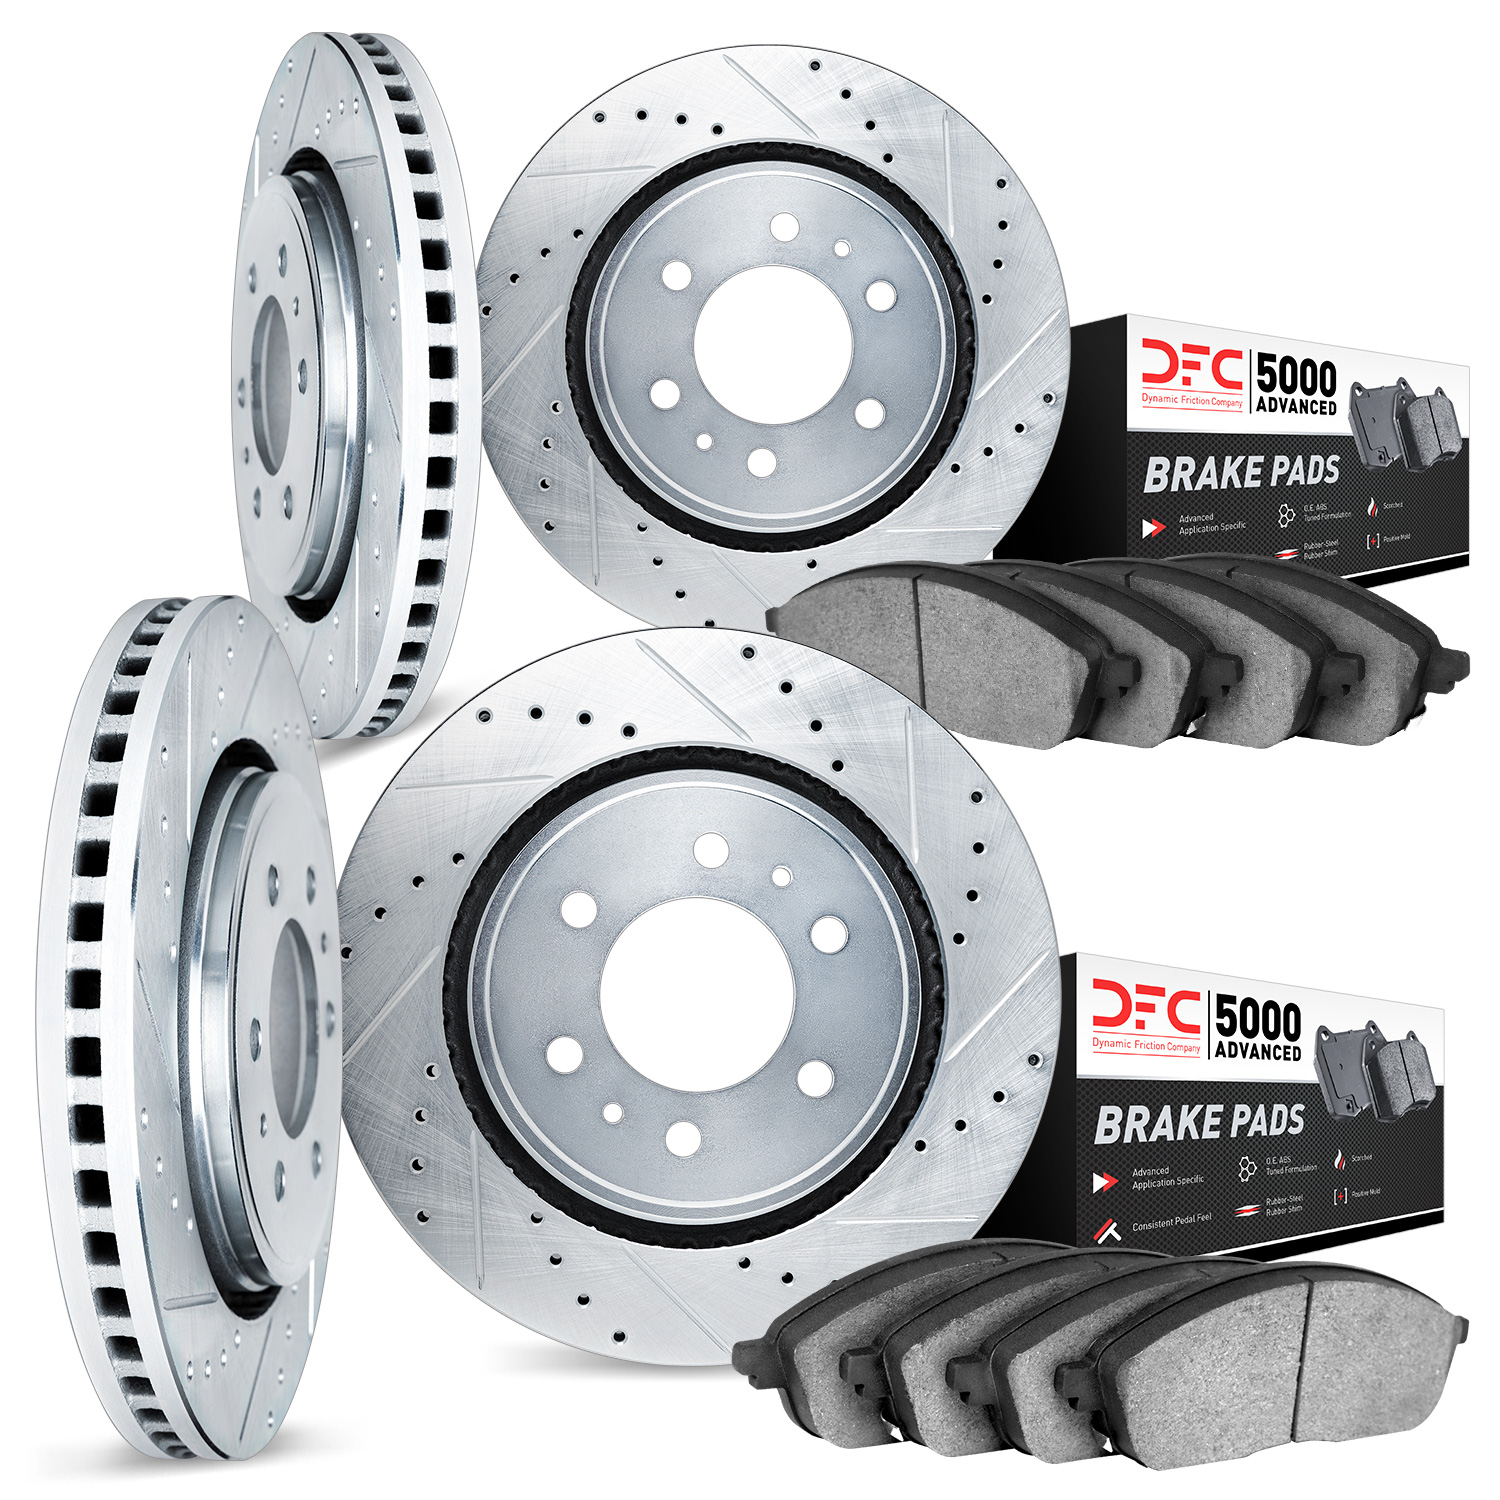 7504-47260 Drilled/Slotted Brake Rotors w/5000 Advanced Brake Pads Kit [Silver], 2006-2009 GM, Position: Front and Rear